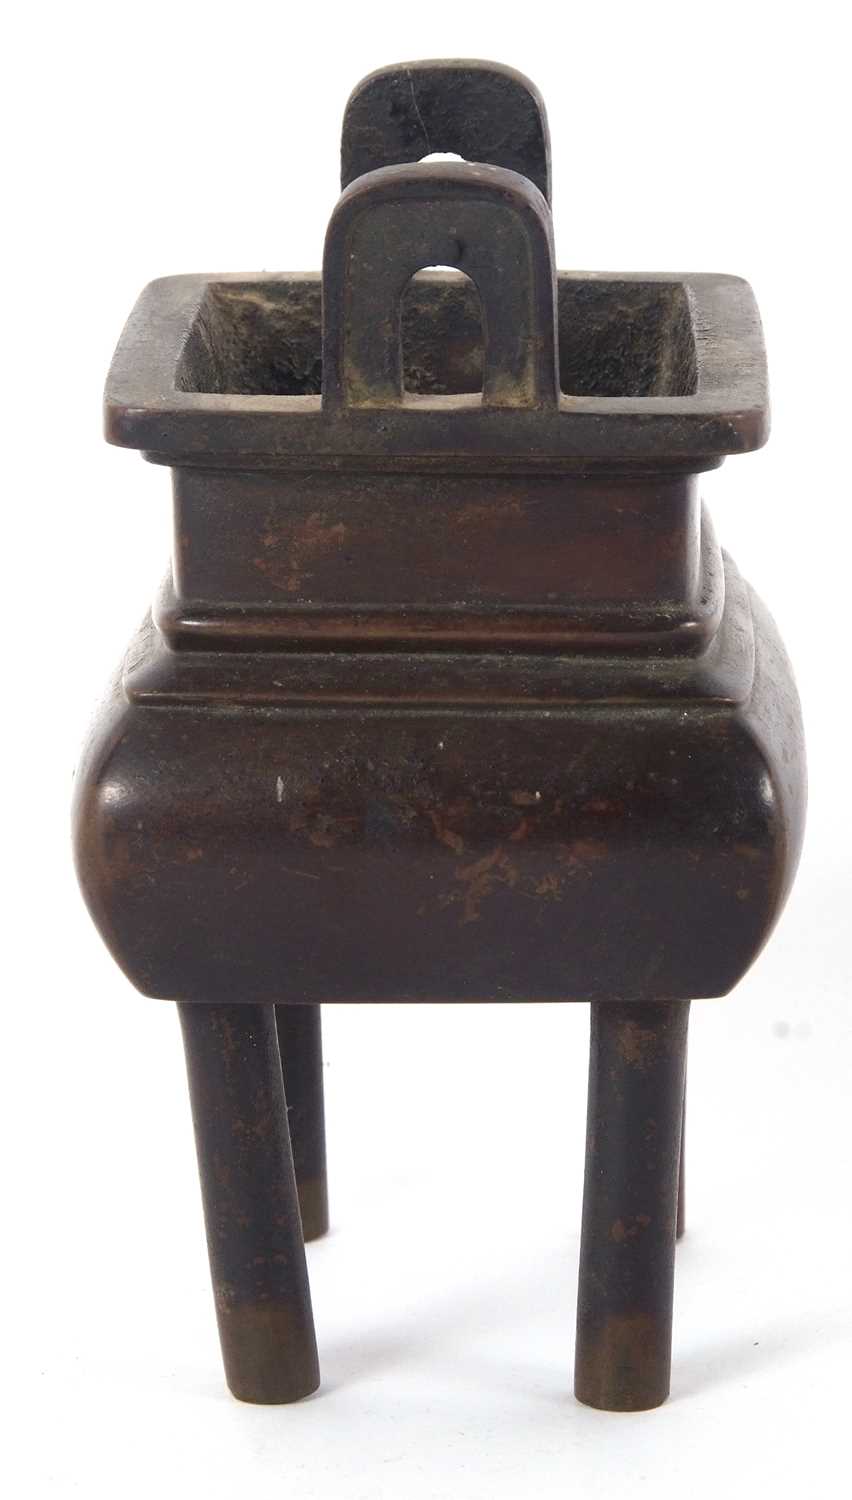 Incense burner of Archaistic form mounted on four legs, 16cm high - Image 11 of 15